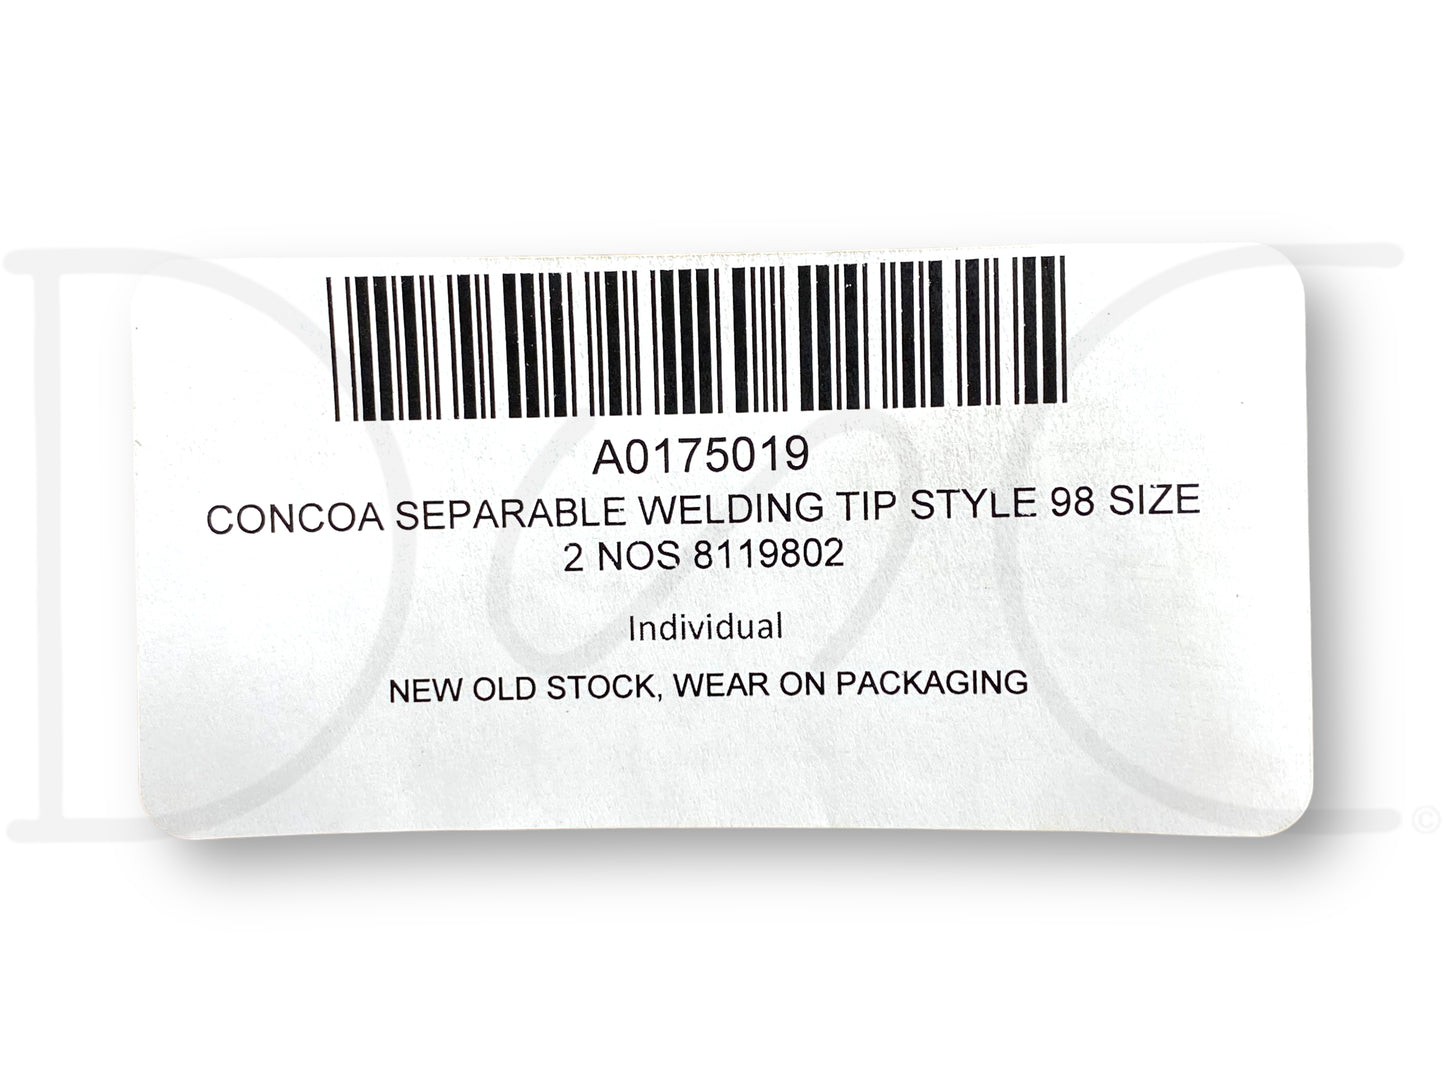 Concoa Separable Welding Tip Style 98 Size 2 Nos 8119802